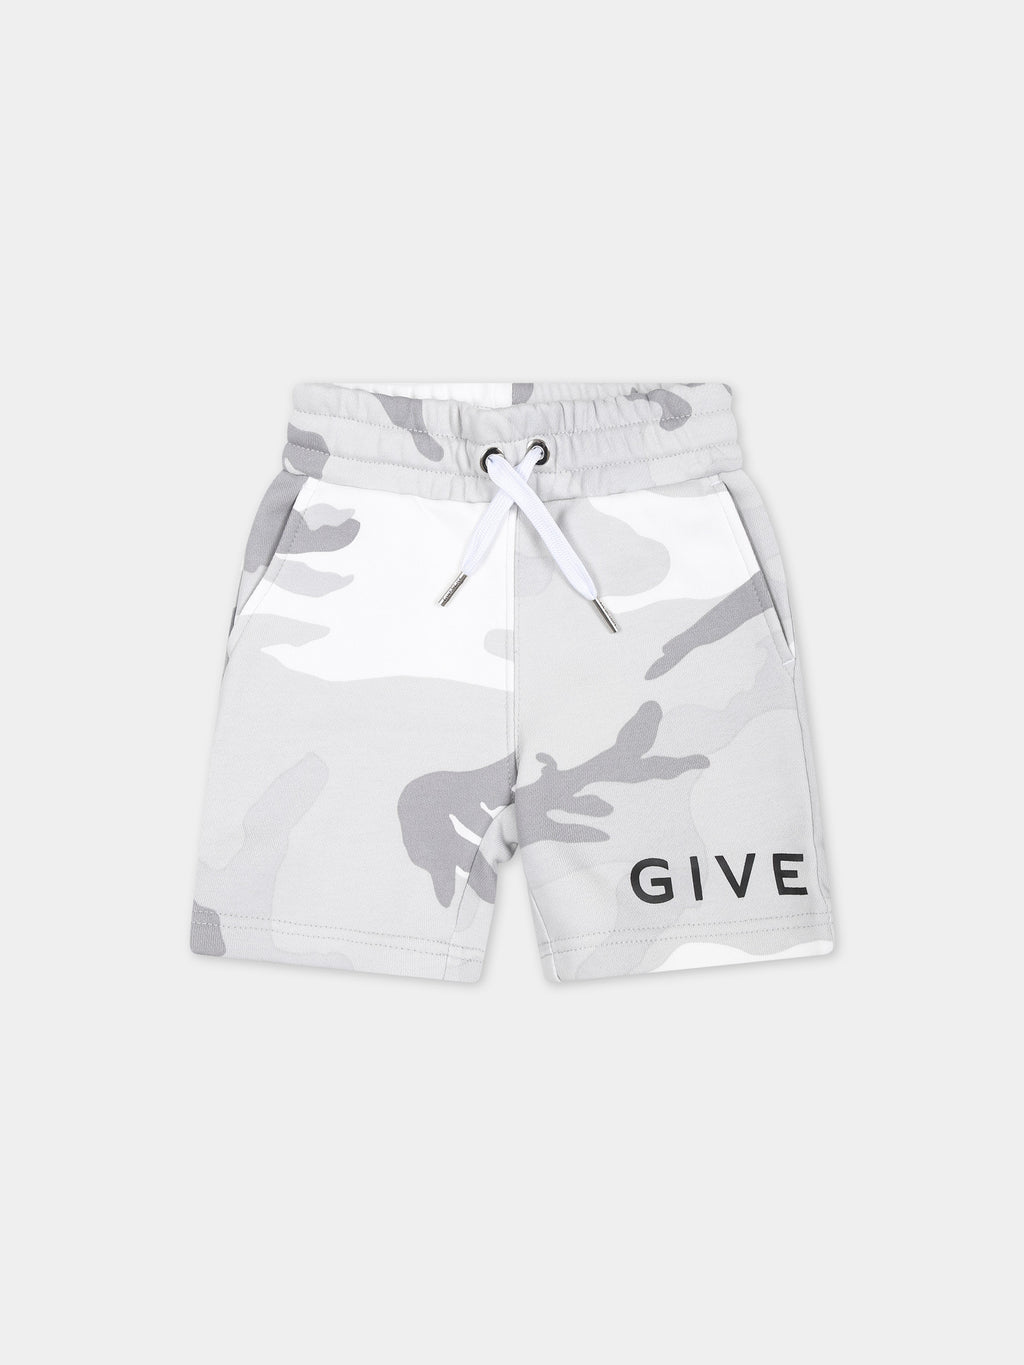 Grey shorts for baby boy with camouflage print and logo